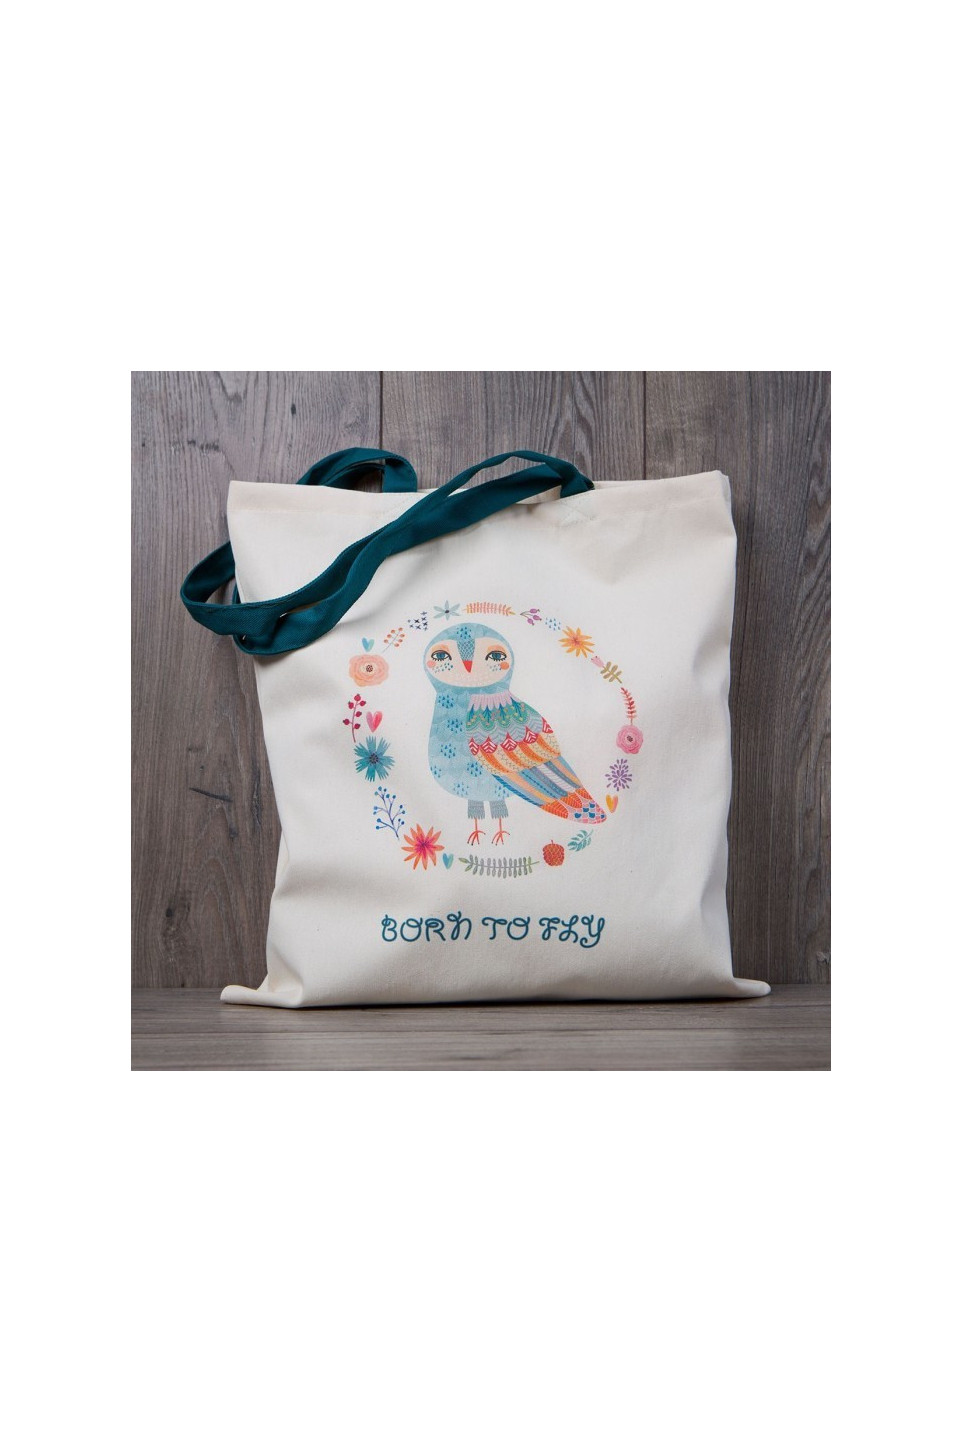 Tote bag BORN TO FLY